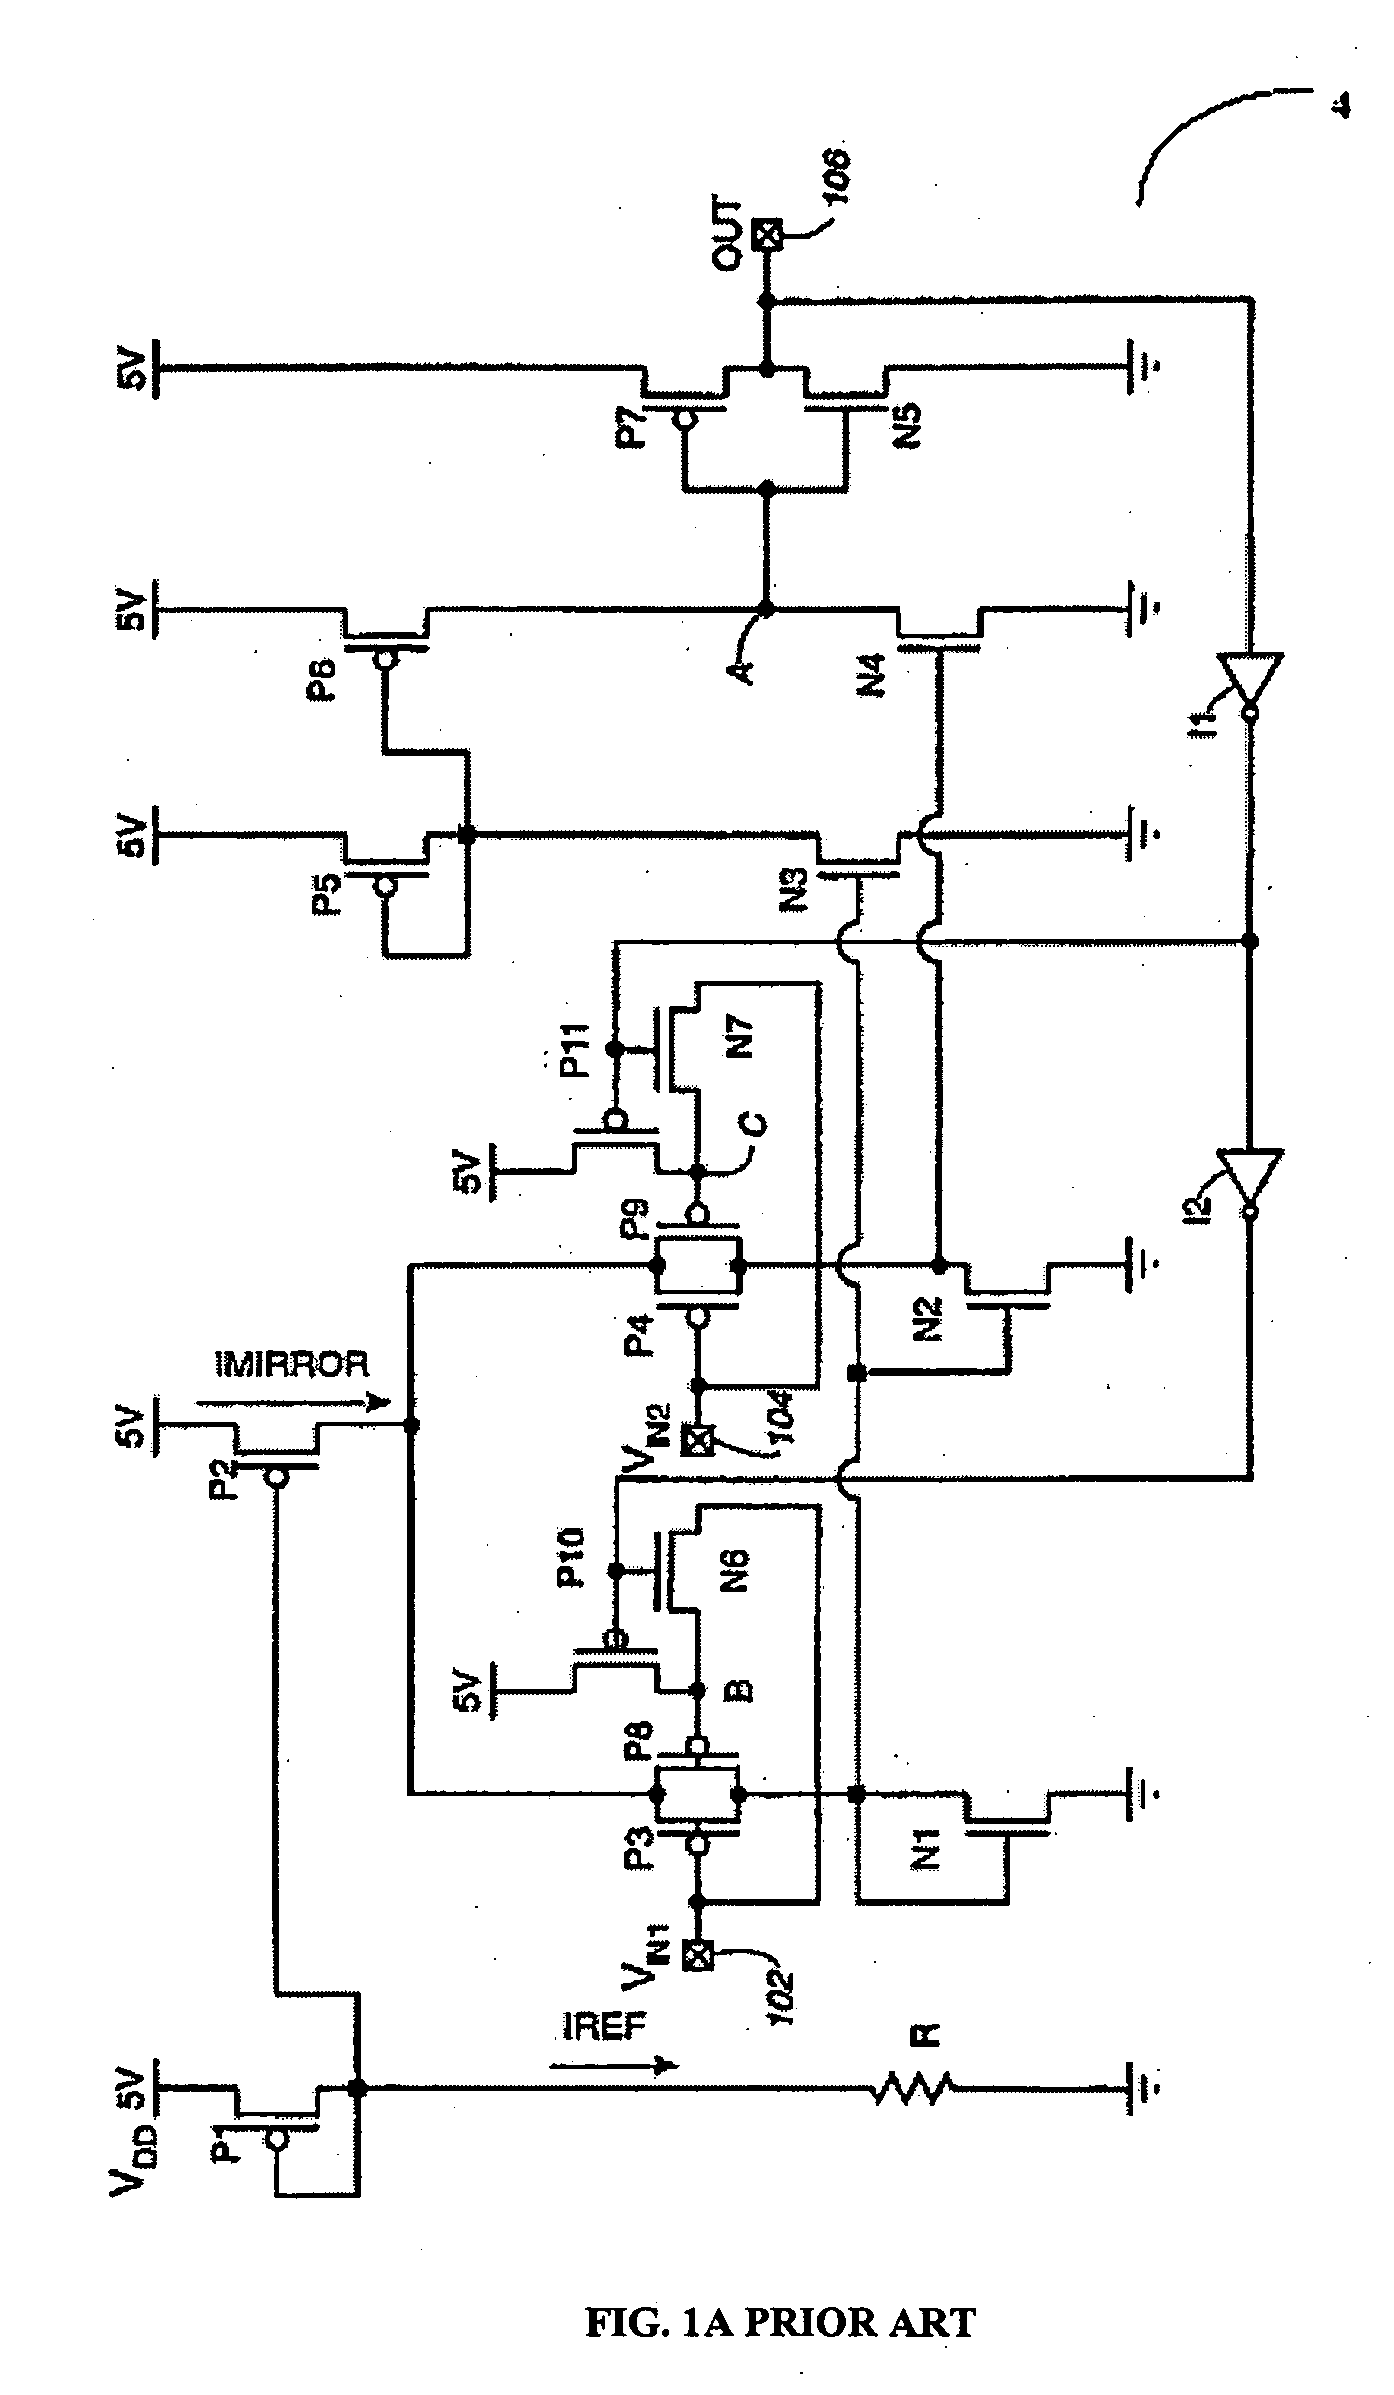 Differential input receiver